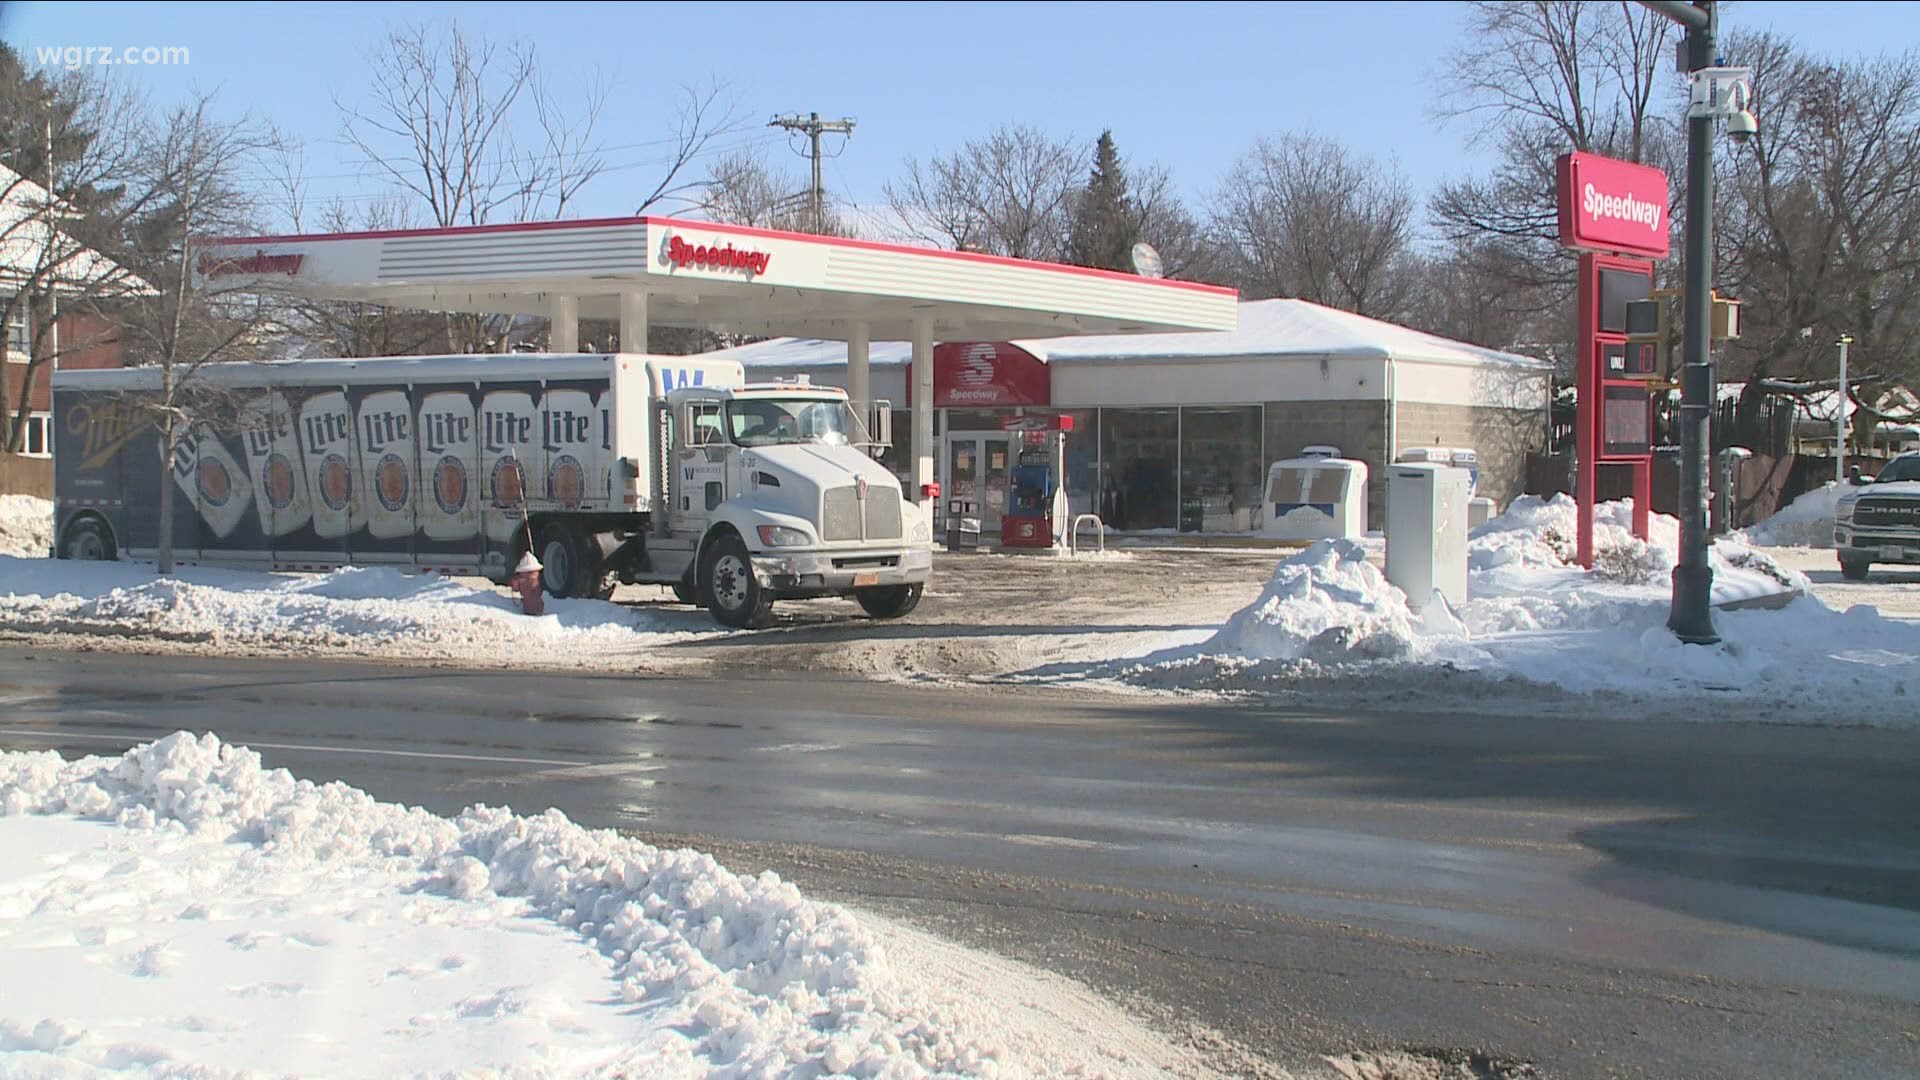 Gas prices rose by over 10 cents in Western New York in the last week.